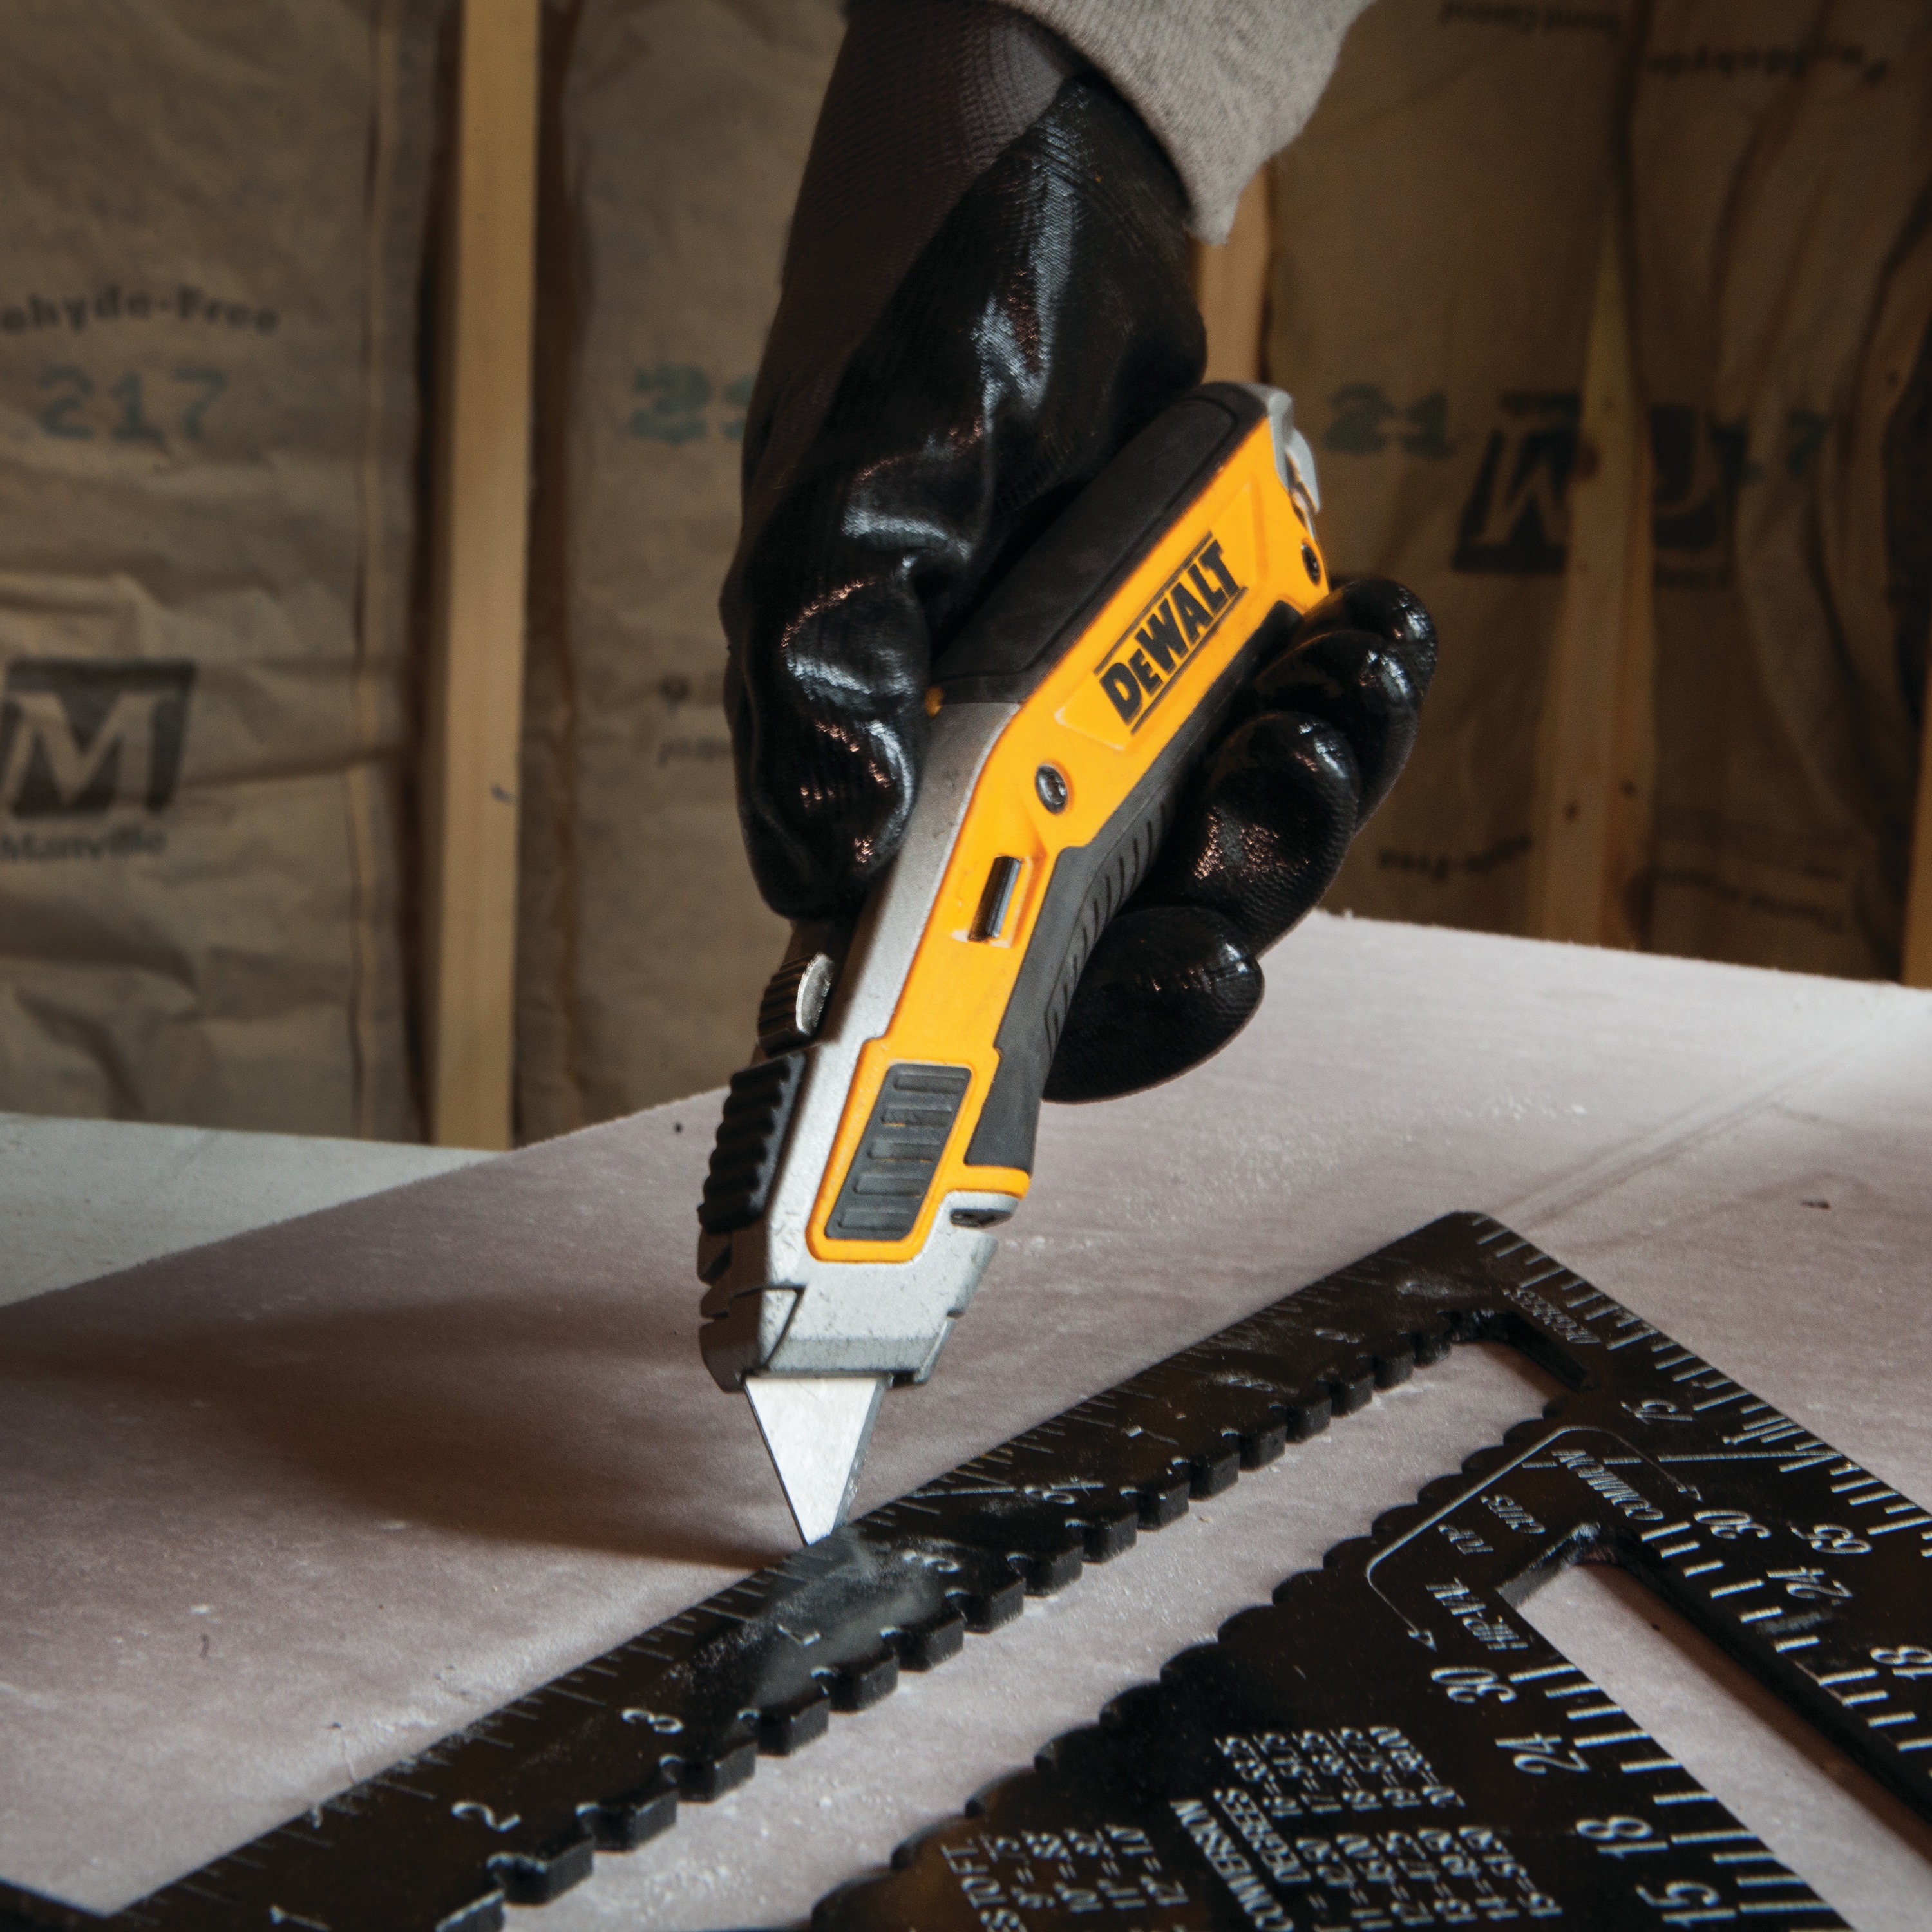 Close up of Premium retractable utility knife cutting hard surface.